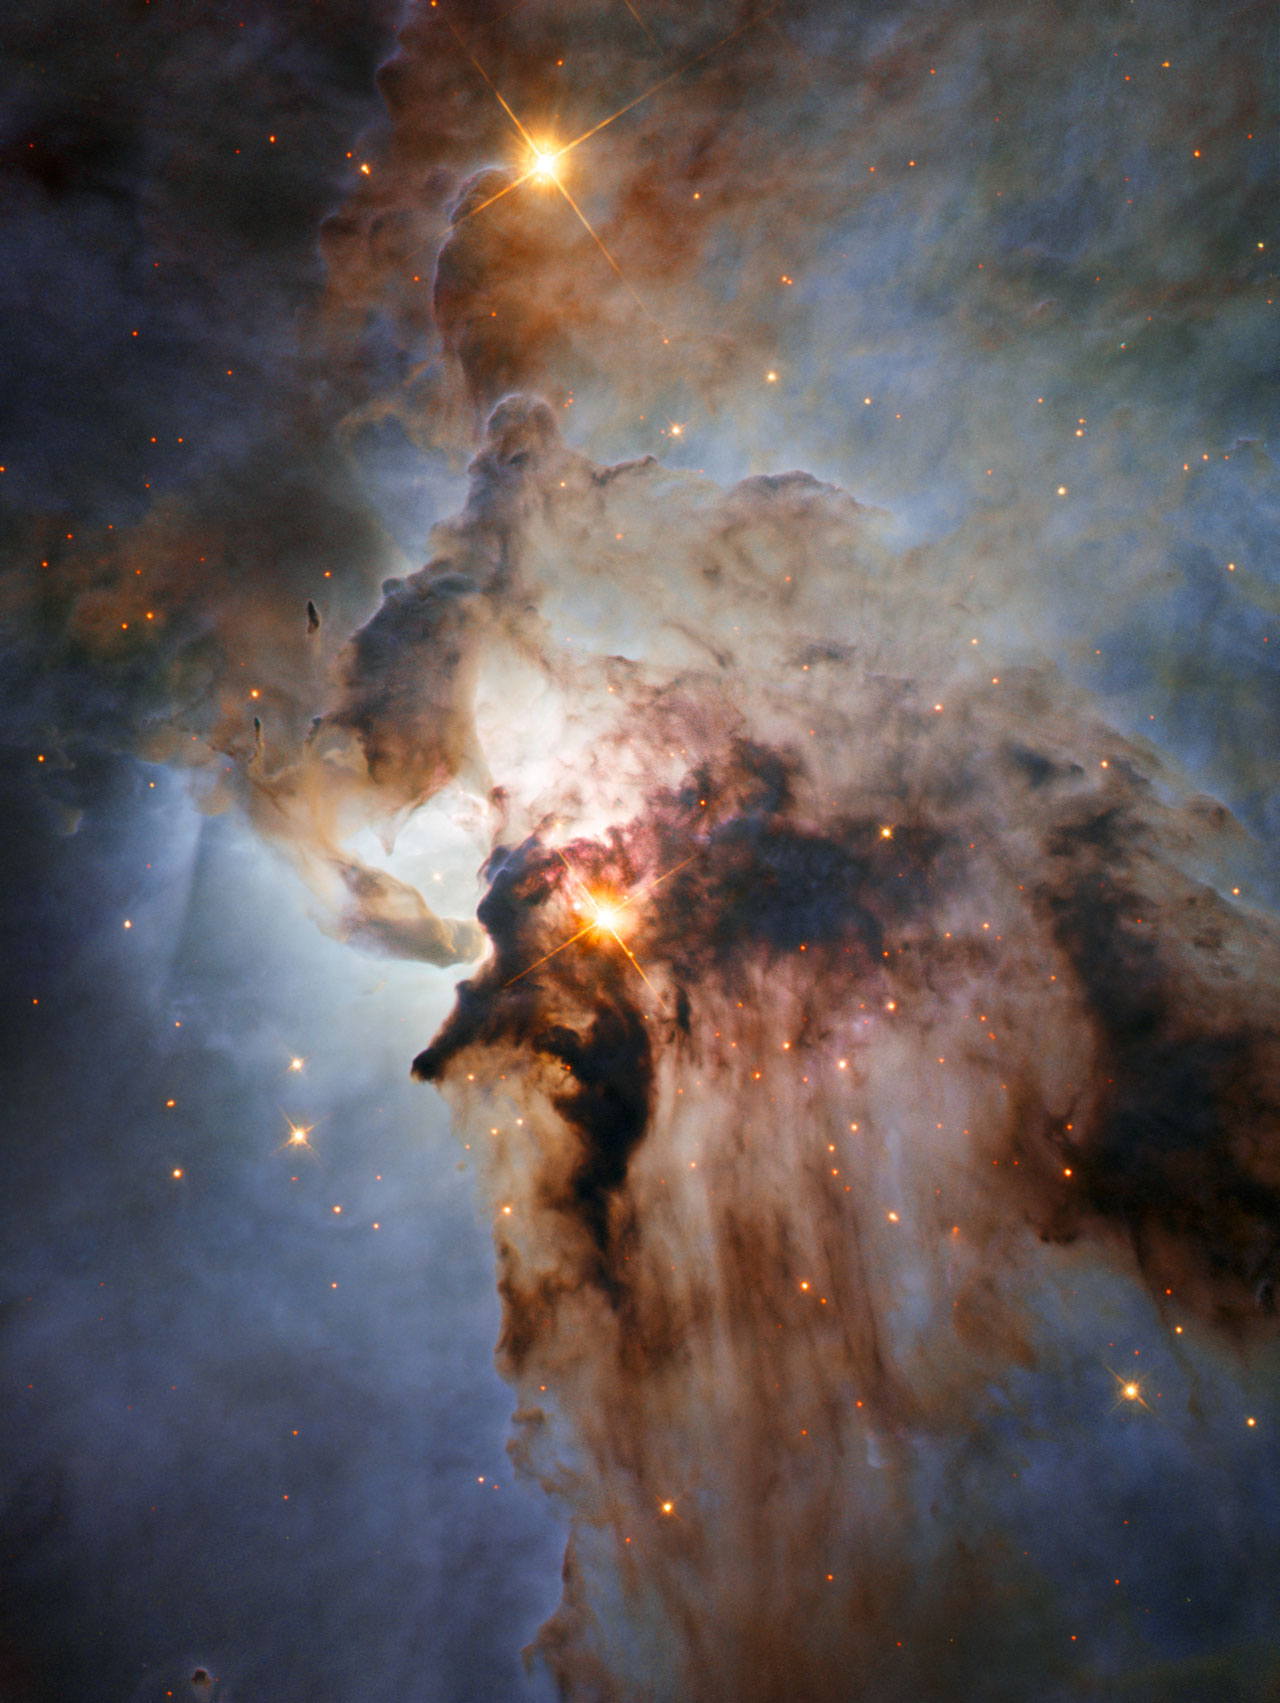 This new NASA/ESA Hubble Space Telescope image shows the Lagoon Nebula, an object with a deceptively tranquil name. The region is filled with intense winds from hot stars, churning funnels of gas, and energetic star formation, all embedded within an intricate haze of gas and pitch-dark dust.